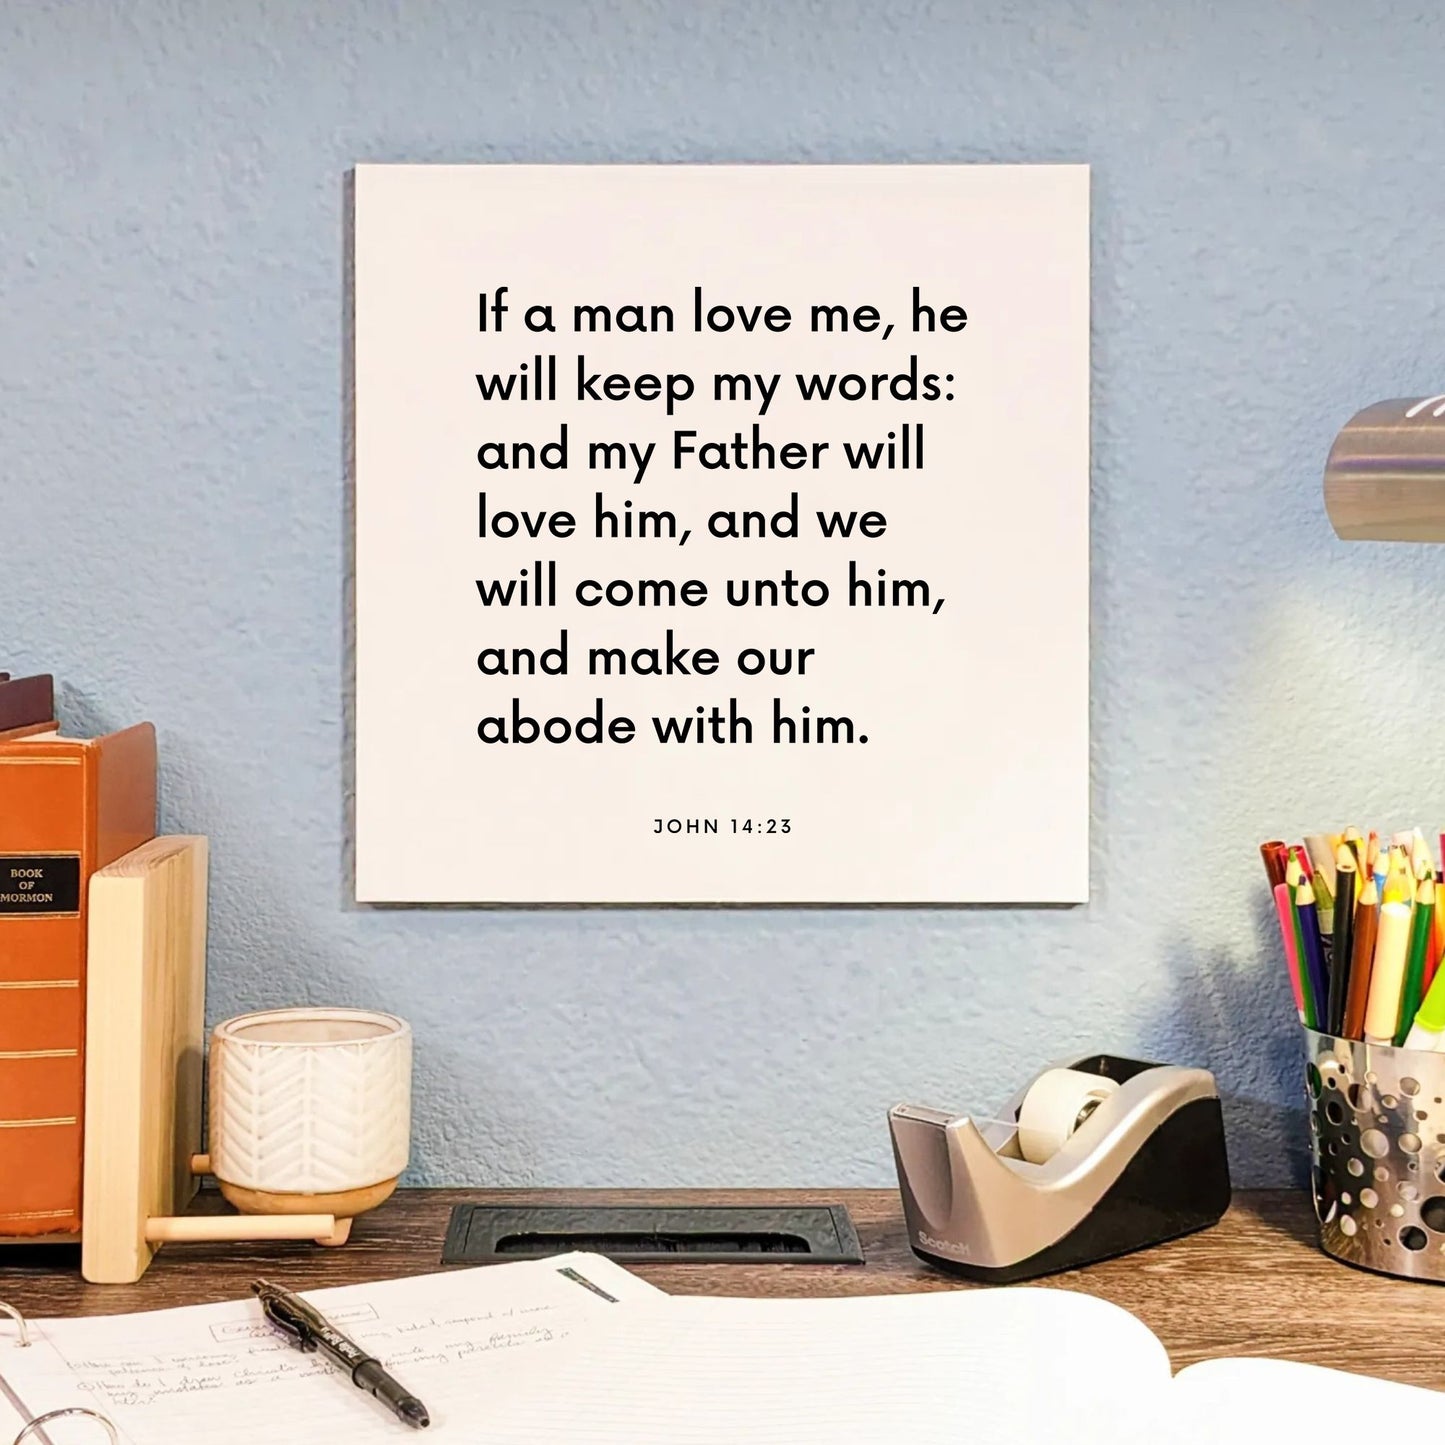 Desk mouting of the scripture tile for John 14:23 - "If a man love me, he will keep my words"